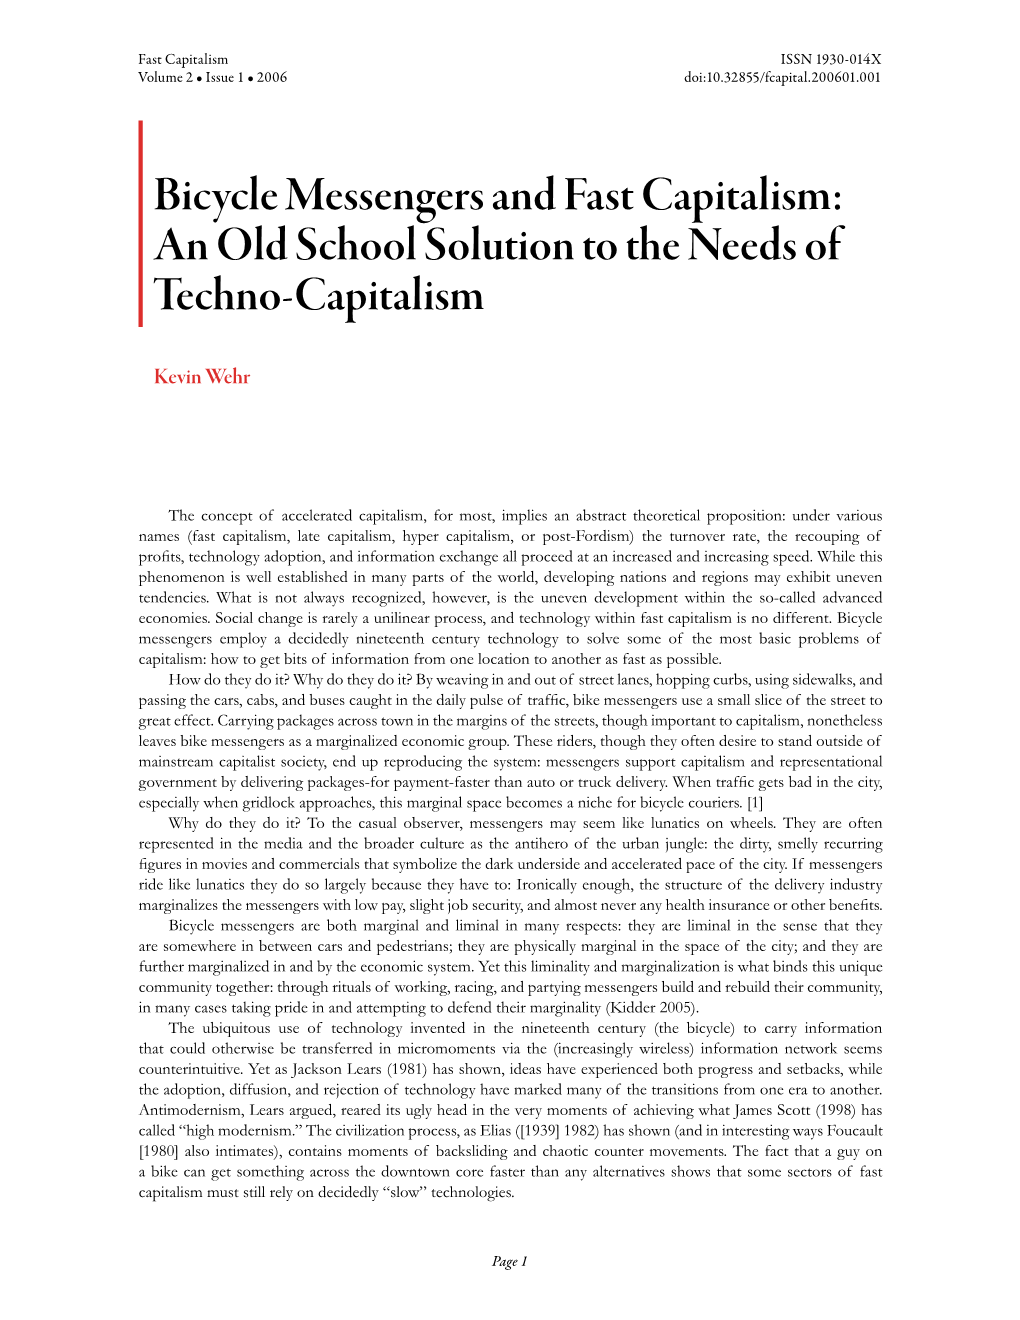 Bicycle Messengers and Fast Capitalism: an Old School Solution to the Needs of Techno-Capitalism